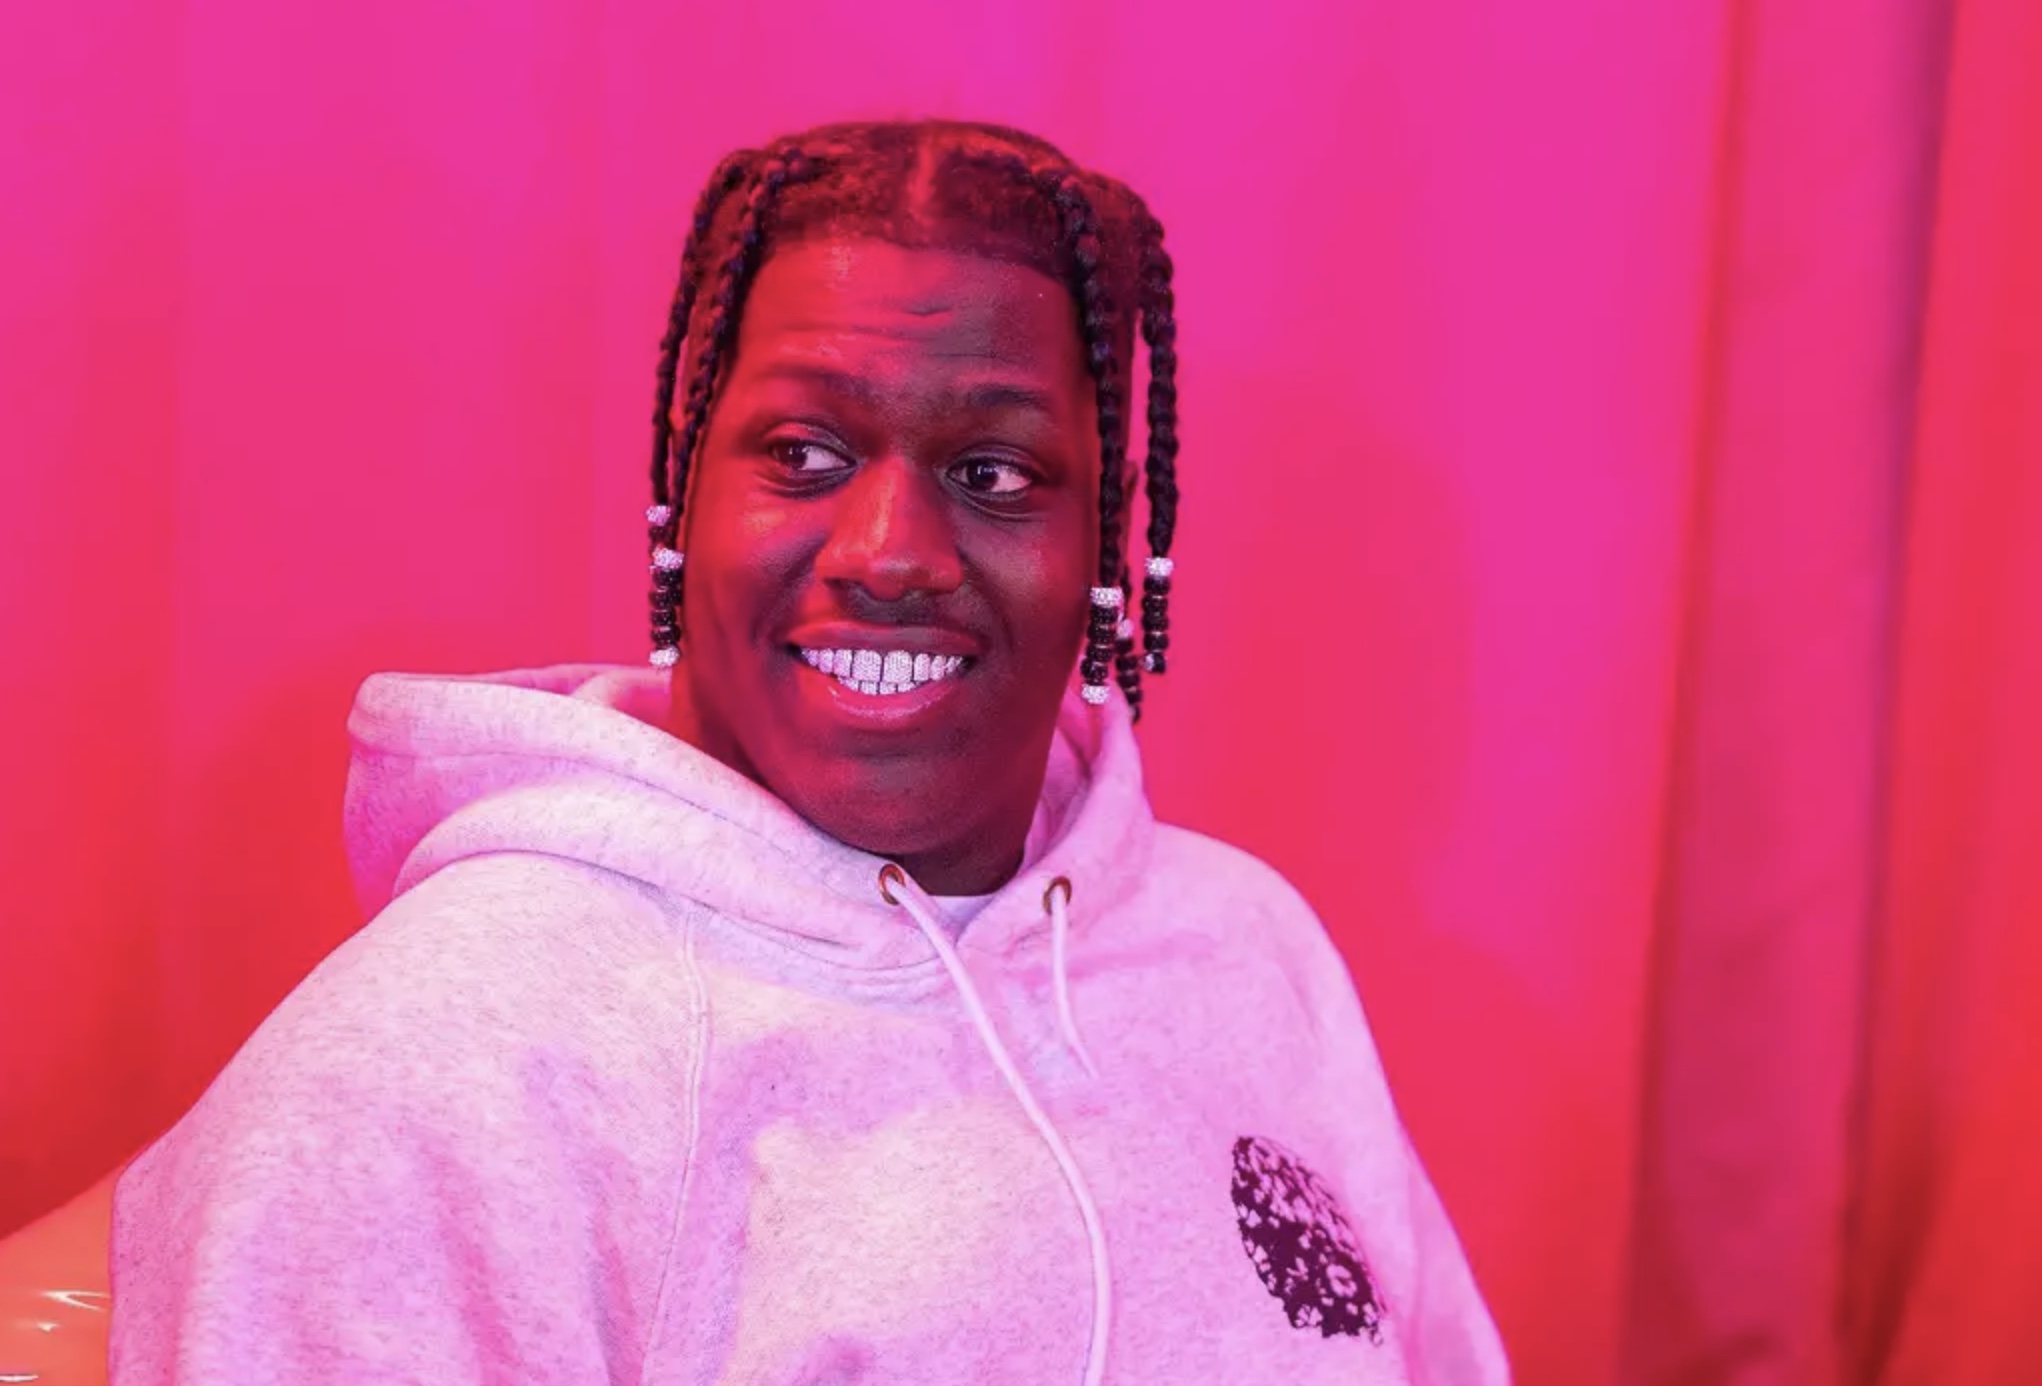 lil yachty strike music video download